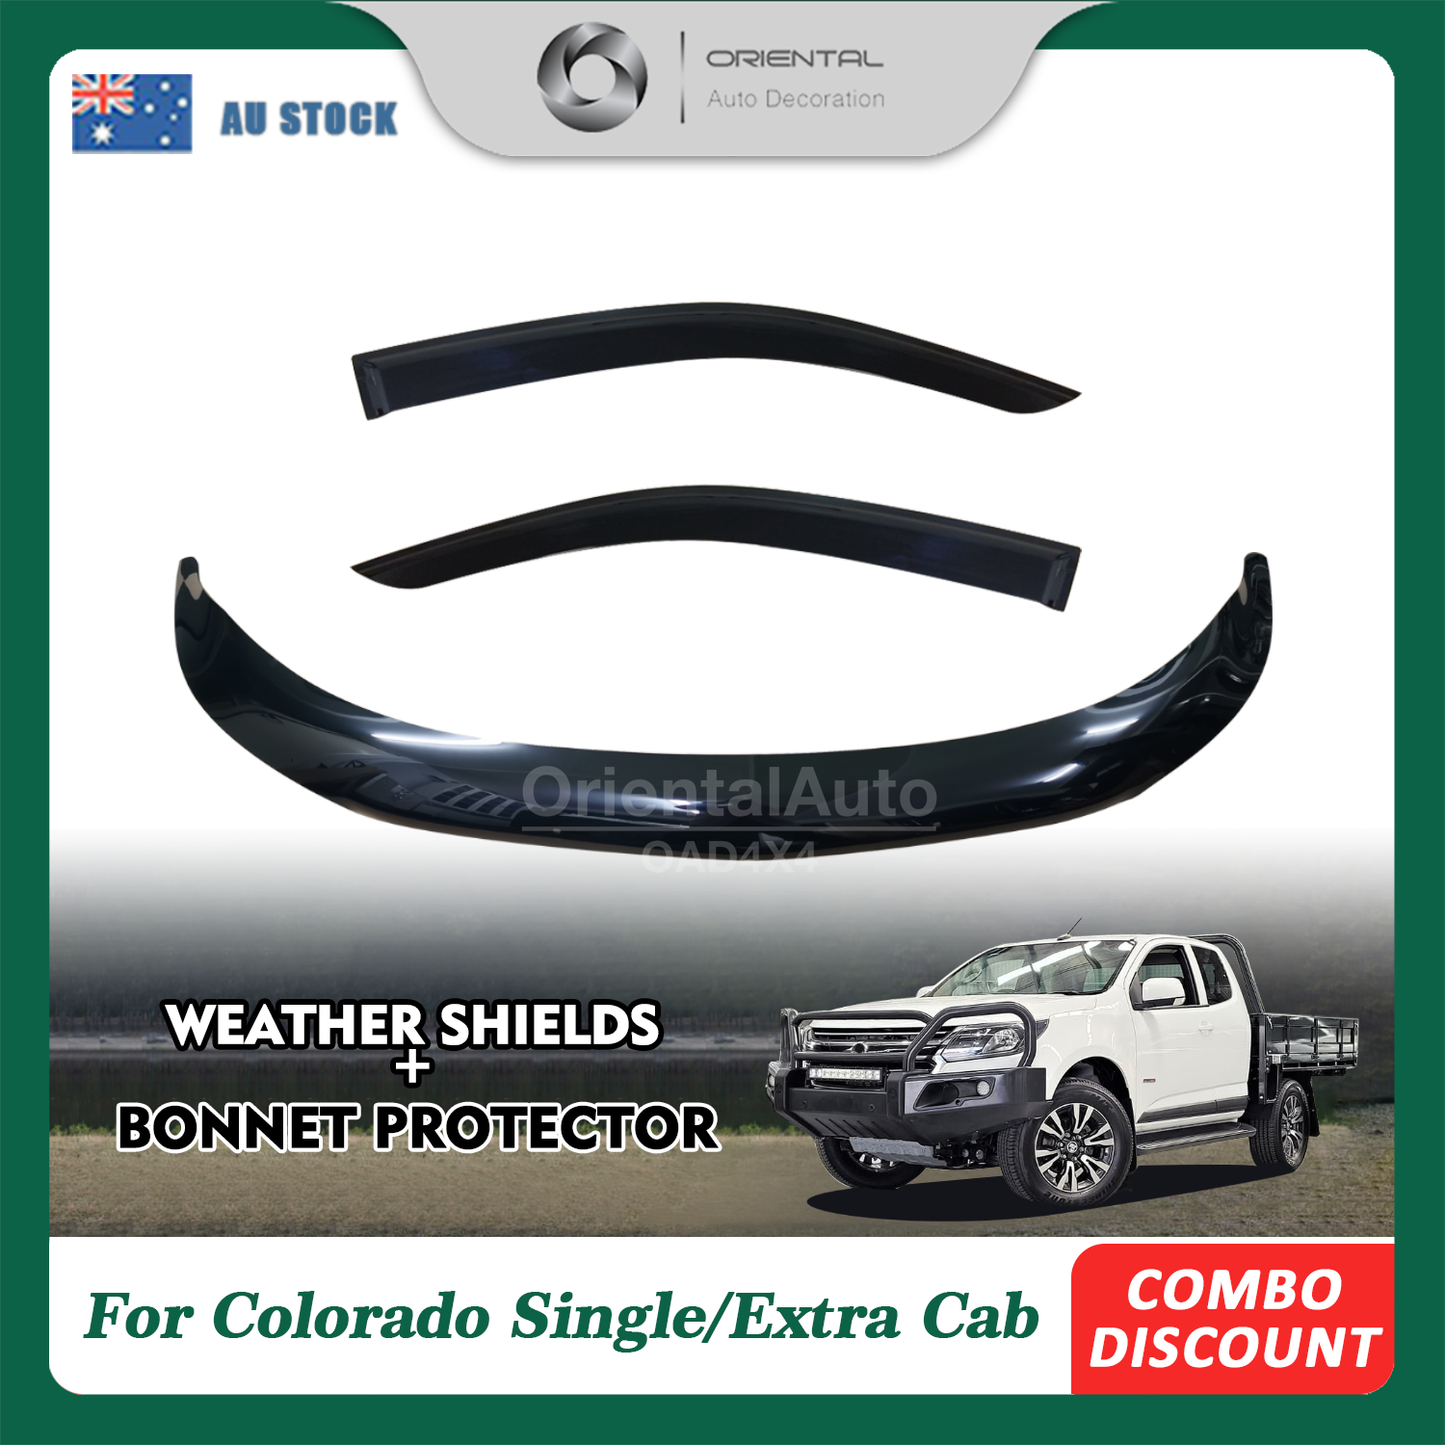 Bonnet Protector & Injection Weathershields Weather Shields Window Visor For Holden Colorado RG Series Single / Extra Cab 2016-Onwards